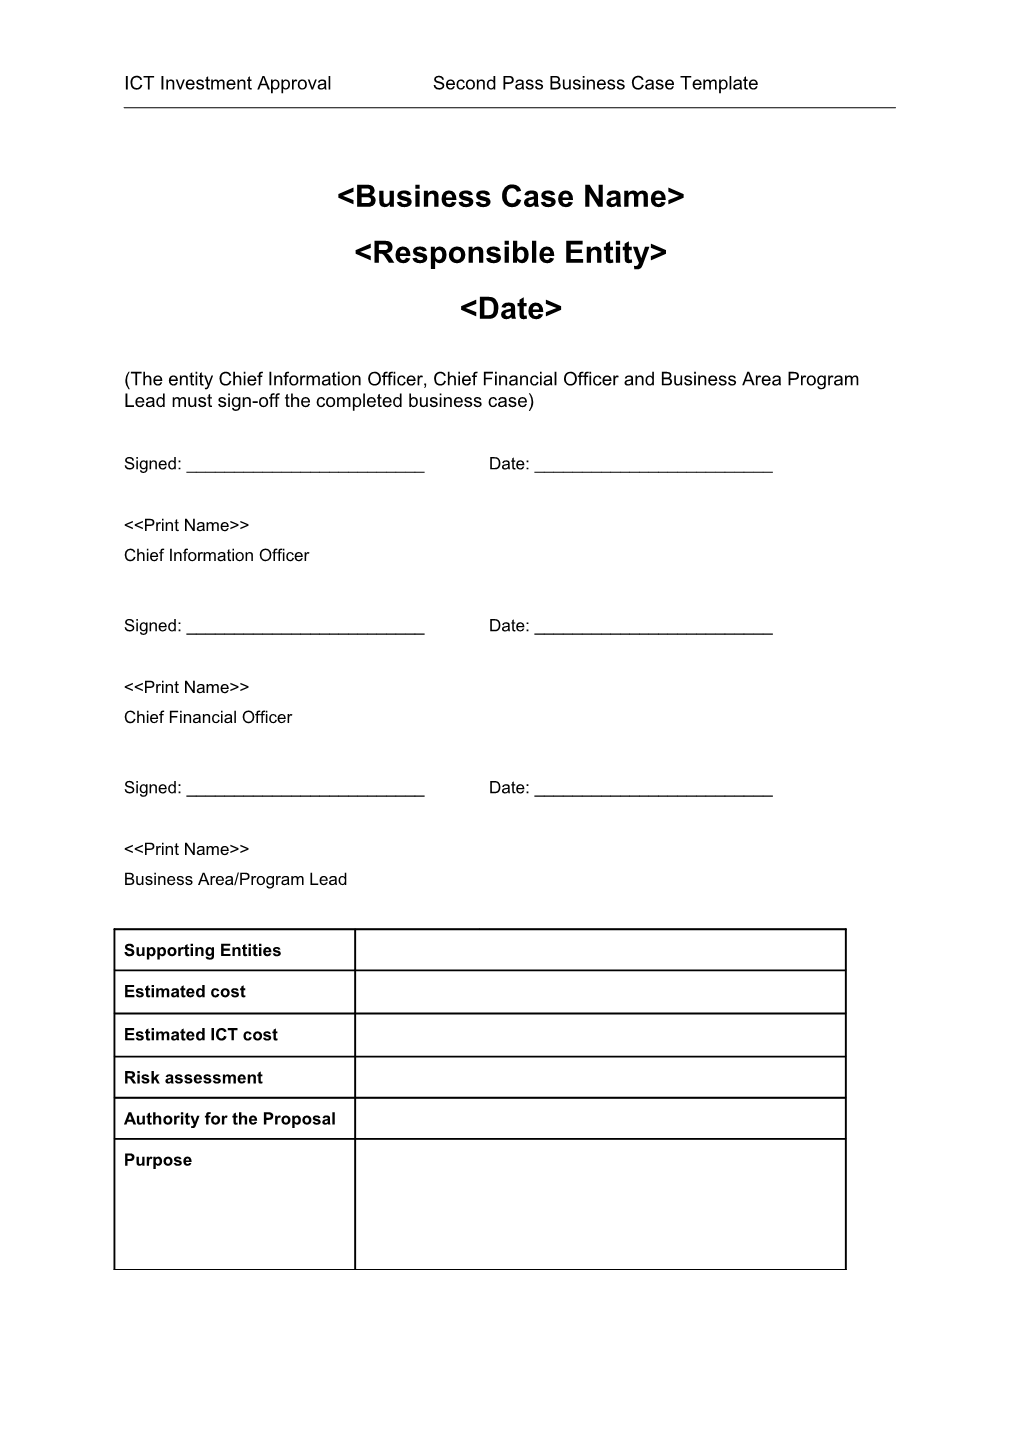 ICT Second Pass Business Case Template